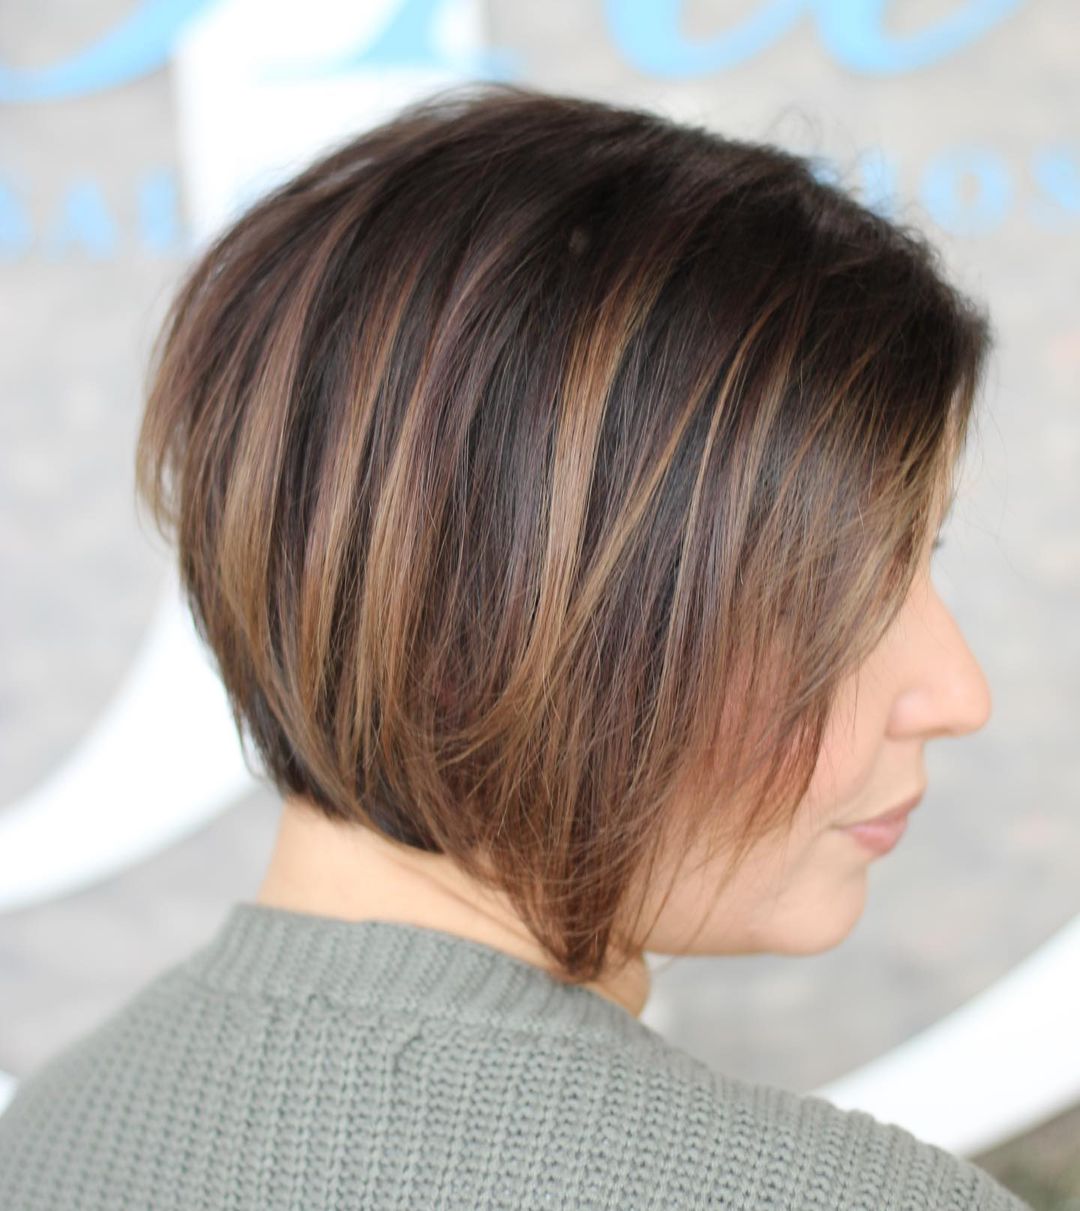 Stacked Bob 25 Long stacked bob | Medium length stacked bob | Pictures of stacked bob haircuts front and back Stacked Bob Hairstyles for Women